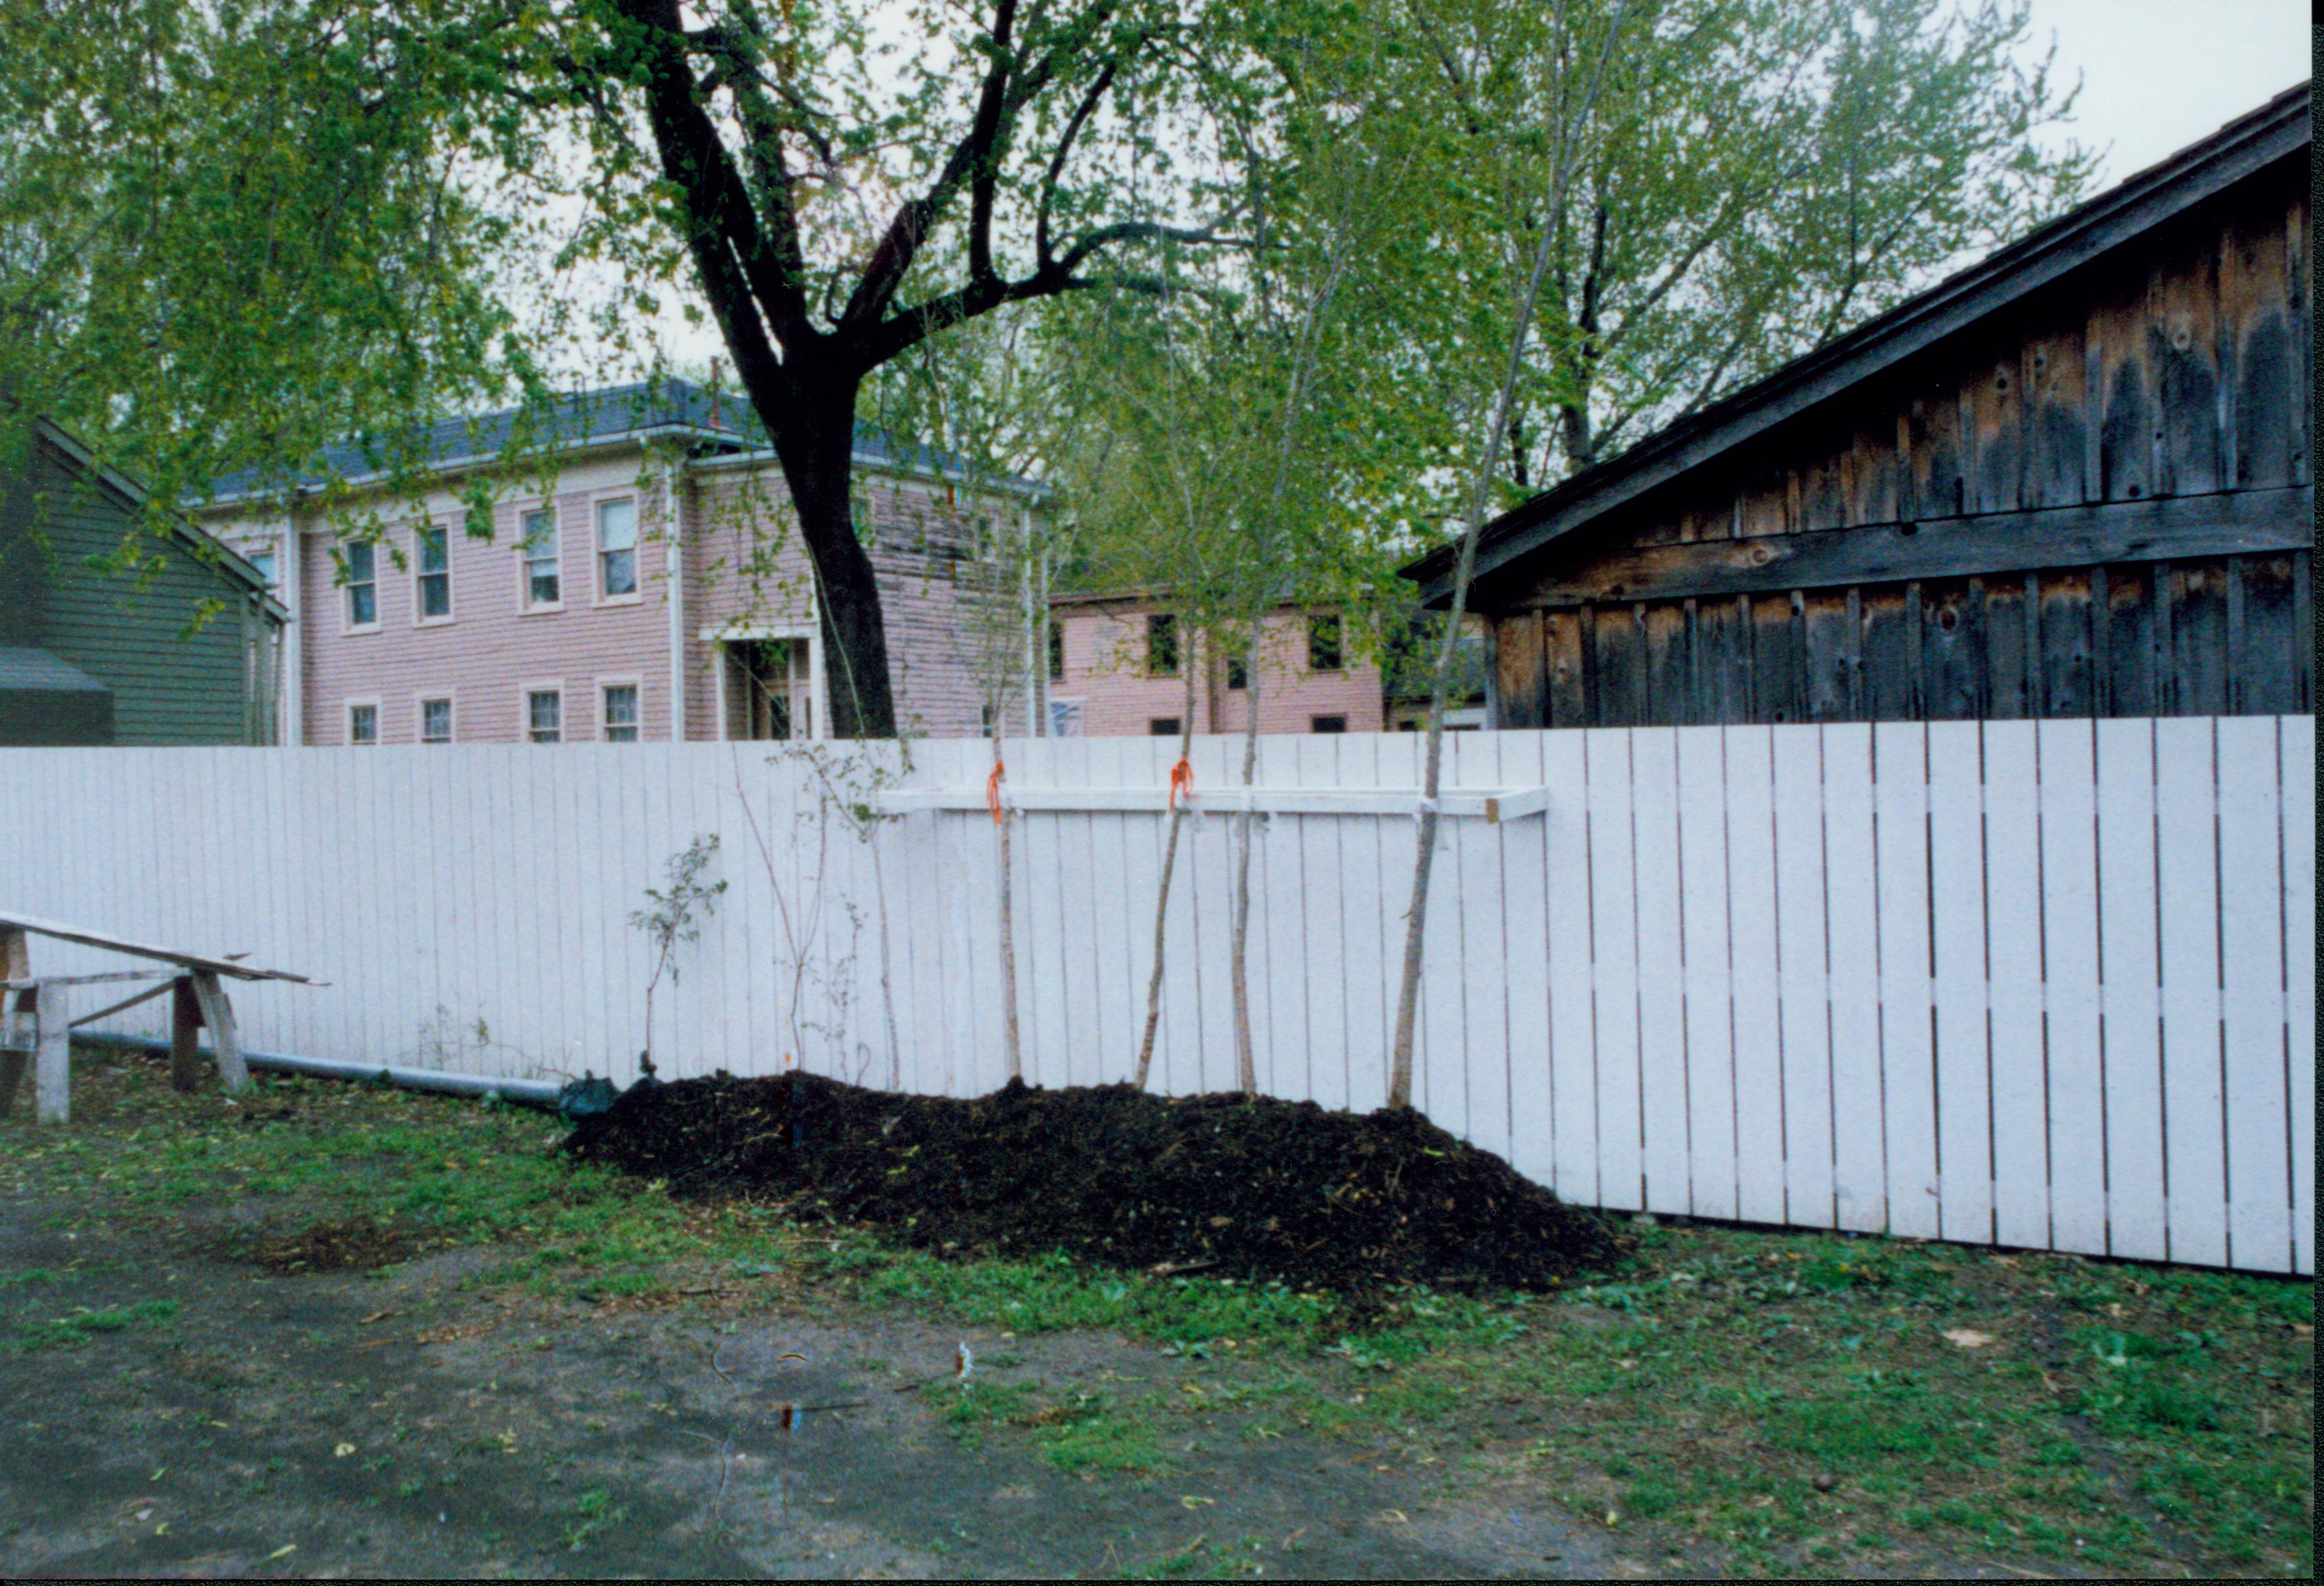 Elm tree replacement - replacement trees from Morton Arboretum for locations around park, temporary planted in Corneau backyard (Block 6, Lot 16). Sprigg House in background left, Miller and Dubois Houses in background center. Maintenance shed behind fence on right. Looking Southeast from near alley Elm tree, Corneau, Sprigg, Miller, Dubois, Maintenance Shed, Morton Arboretum